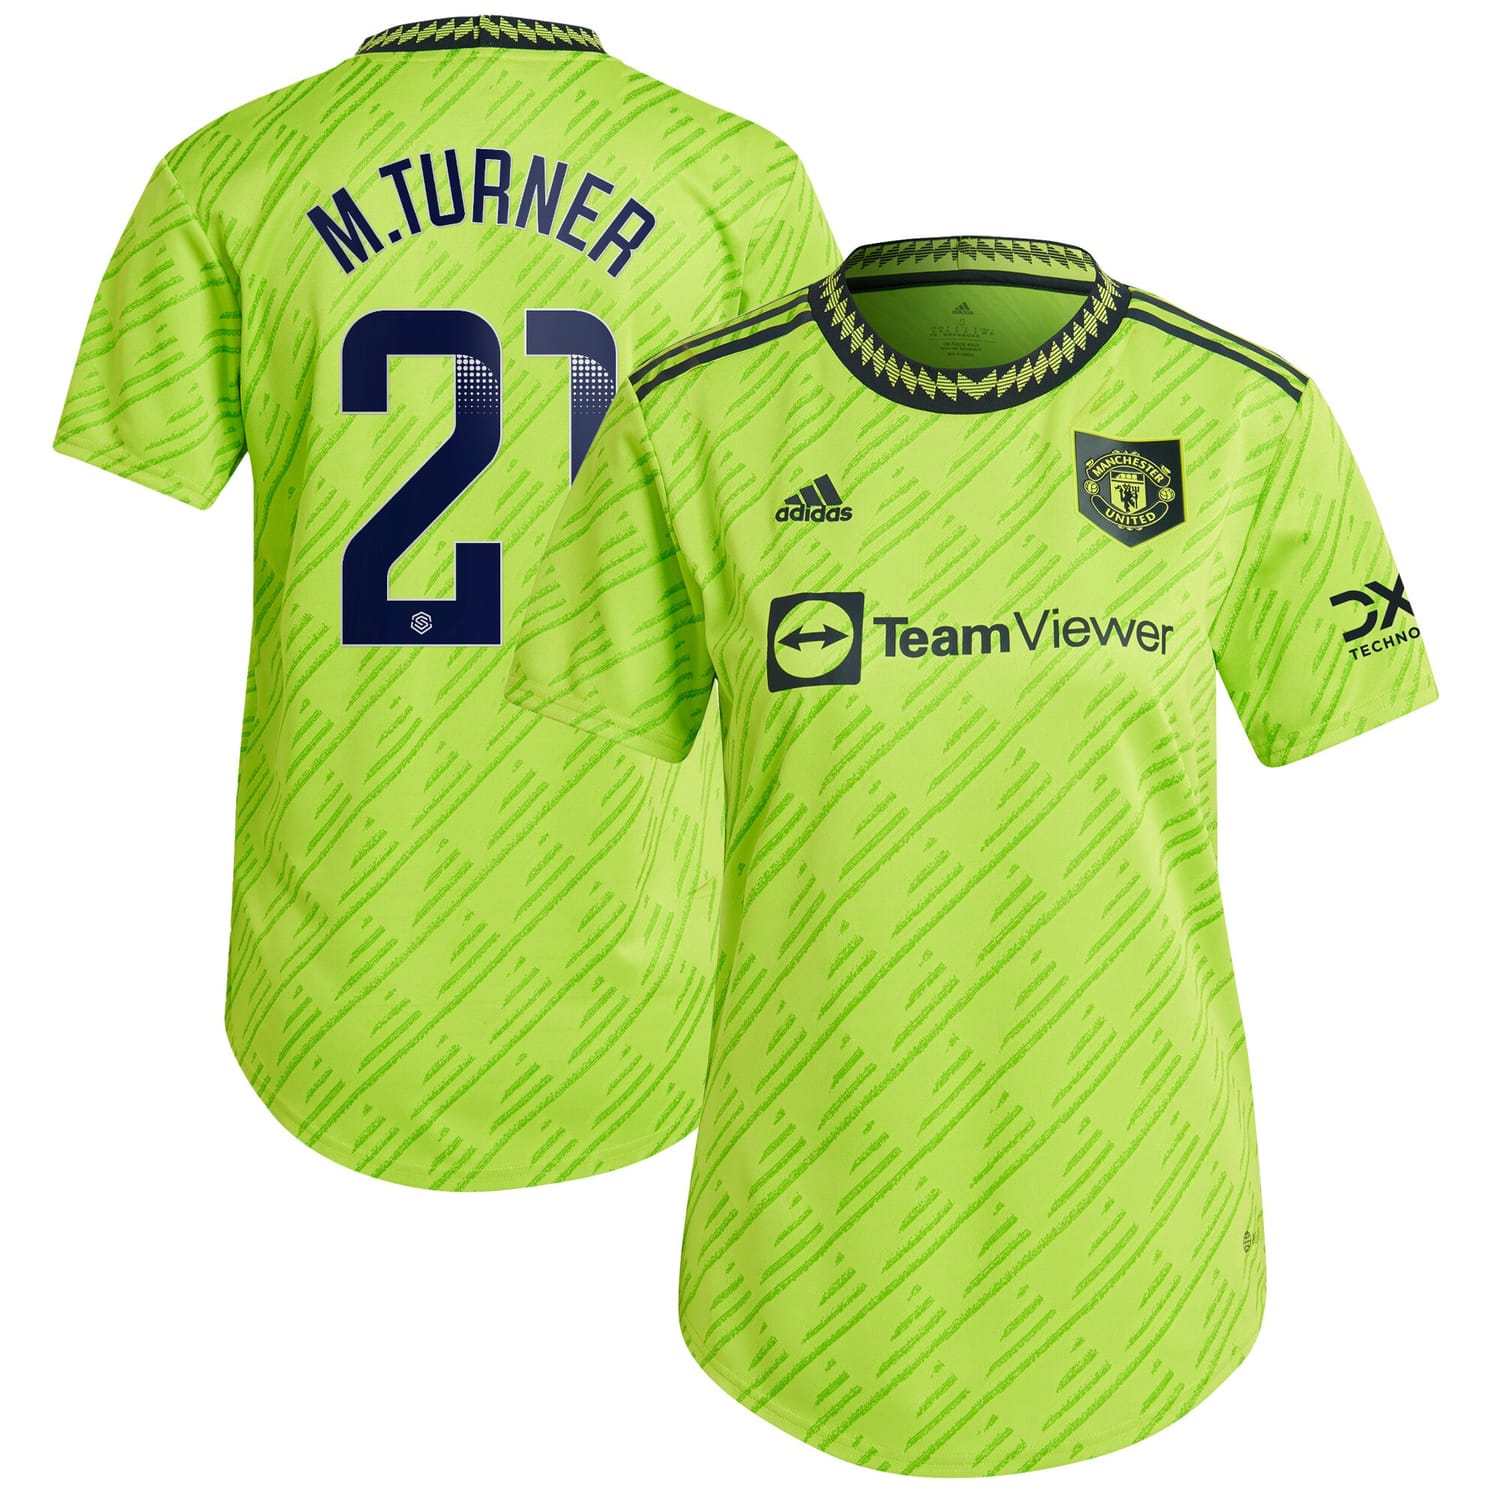 Premier League Manchester United Third WSL Authentic Jersey Shirt 2022-23 player Millie Turner 21 printing for Women